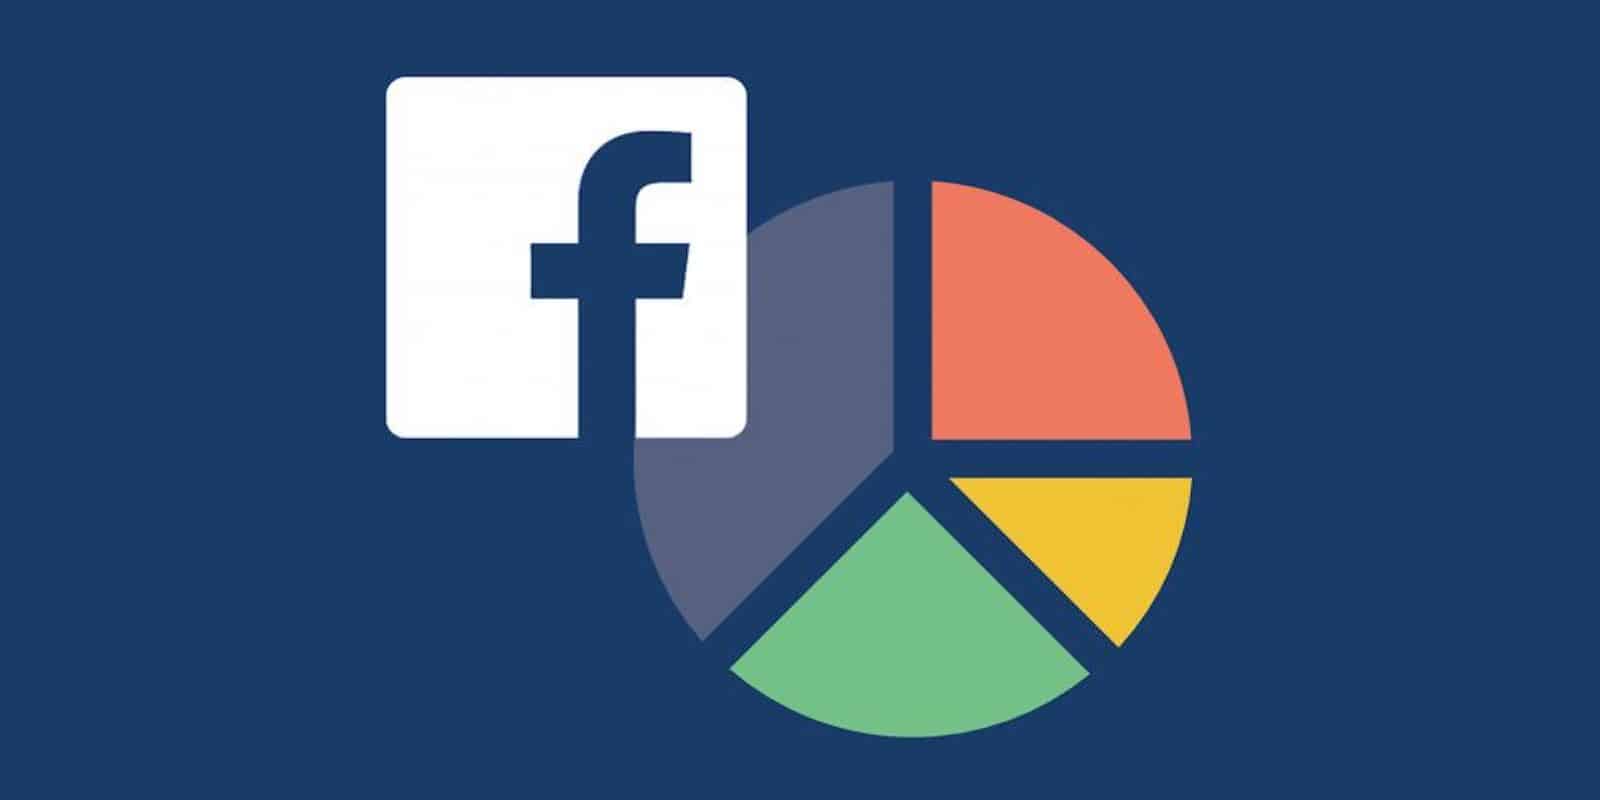 Get the most out of Facebook for your brand or product with this comprehensive marketing course.